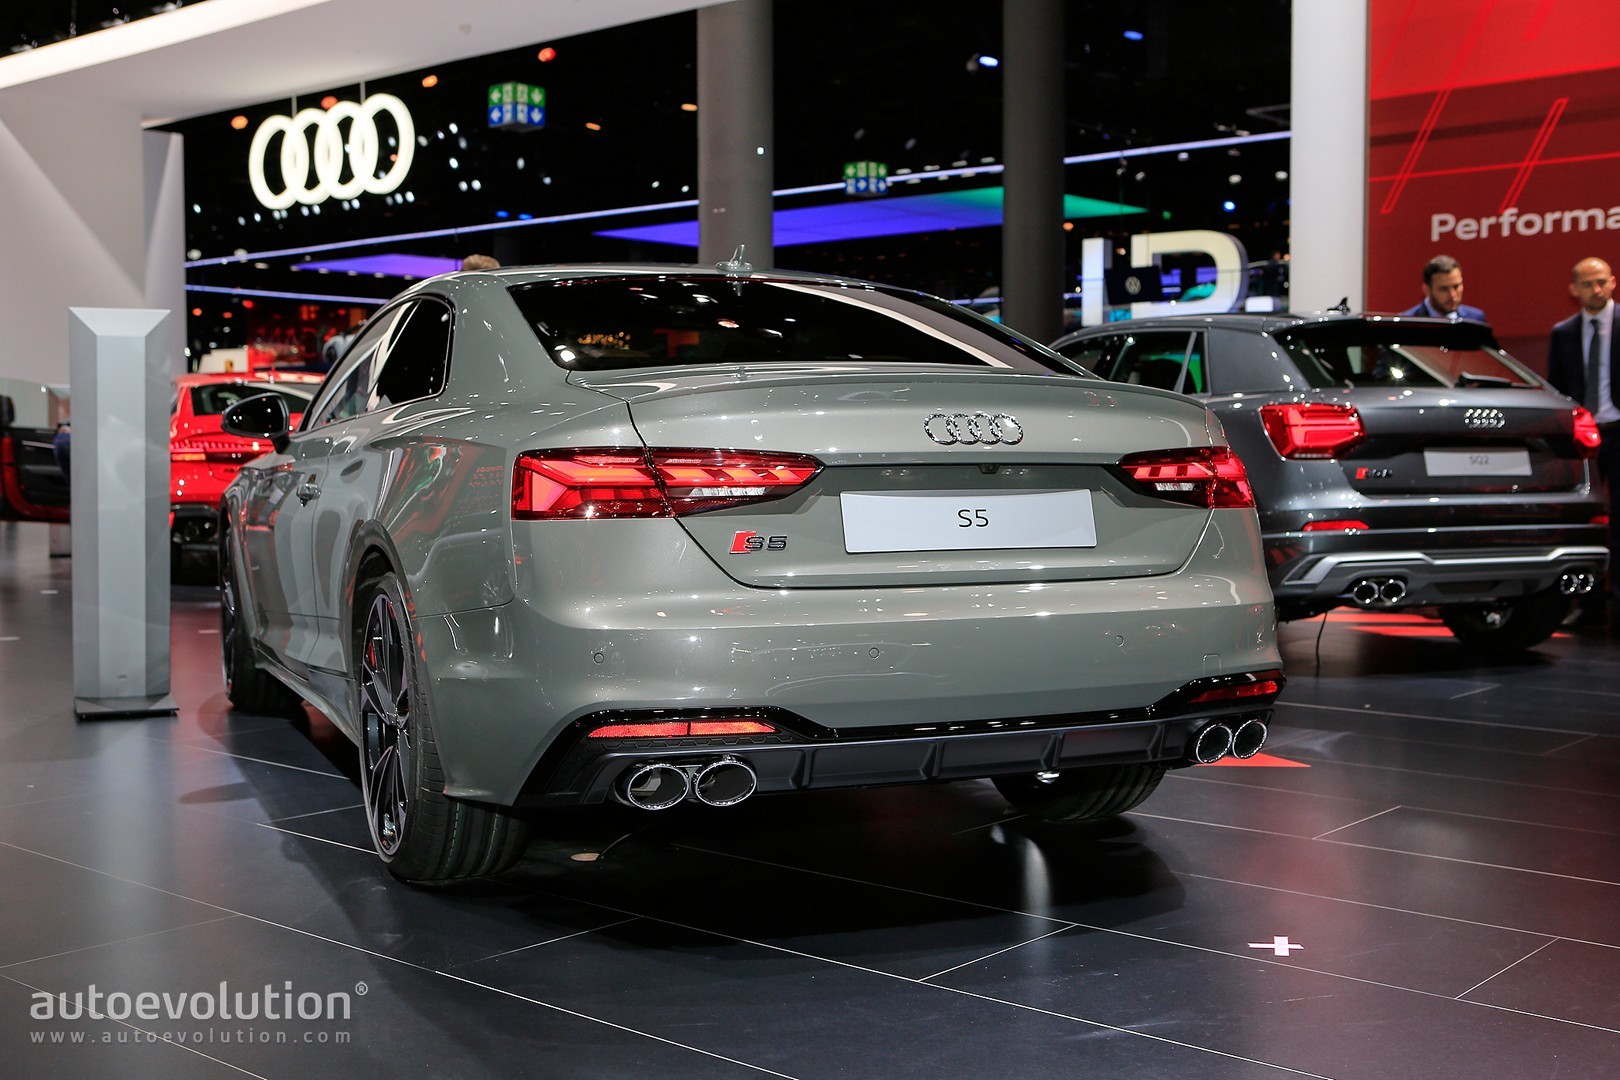 Audi A5 facelift: Barely-there modifications debut at Frankfurt motor show